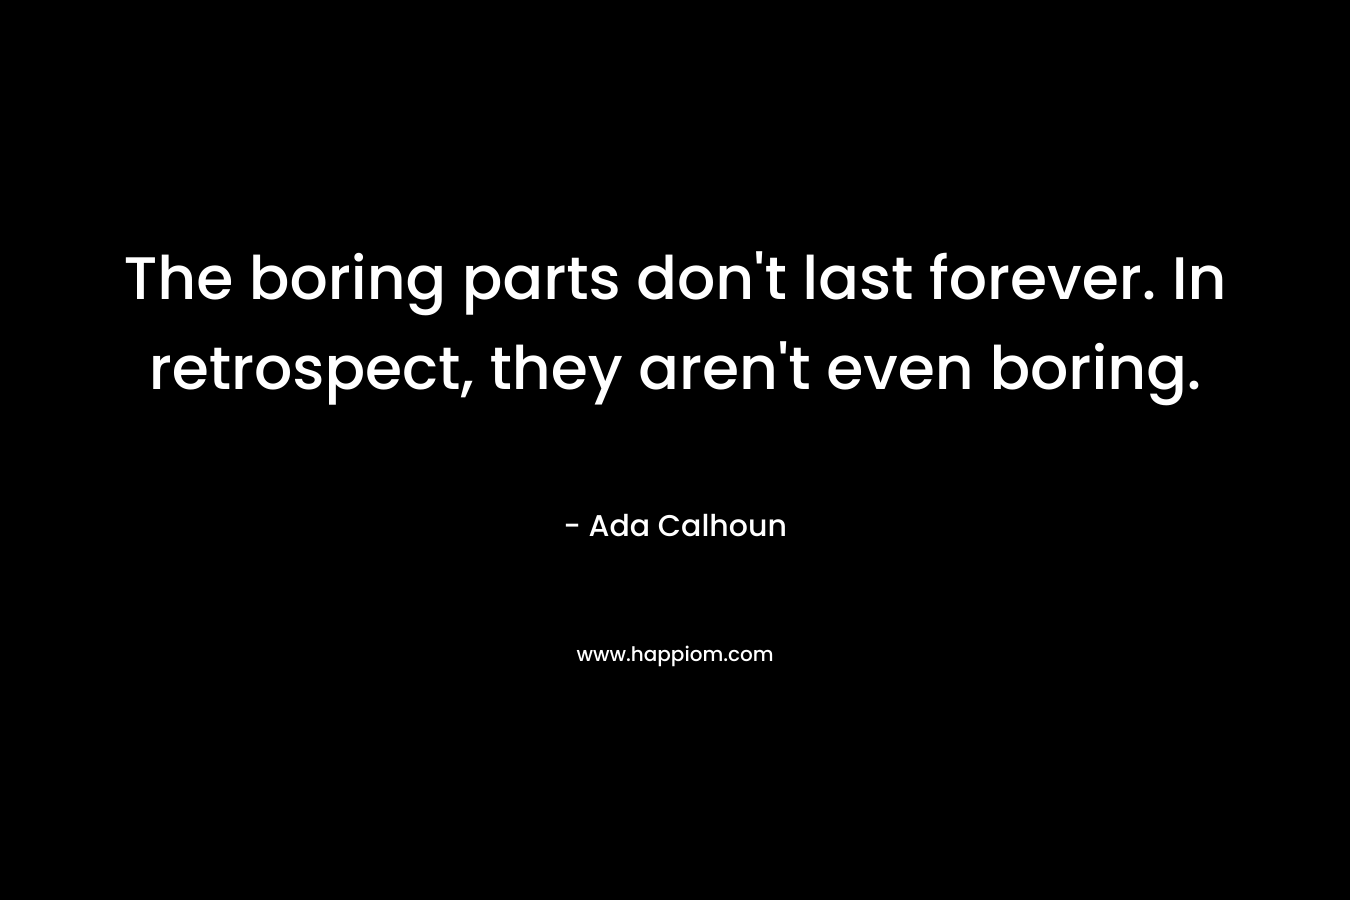 The boring parts don't last forever. In retrospect, they aren't even boring.